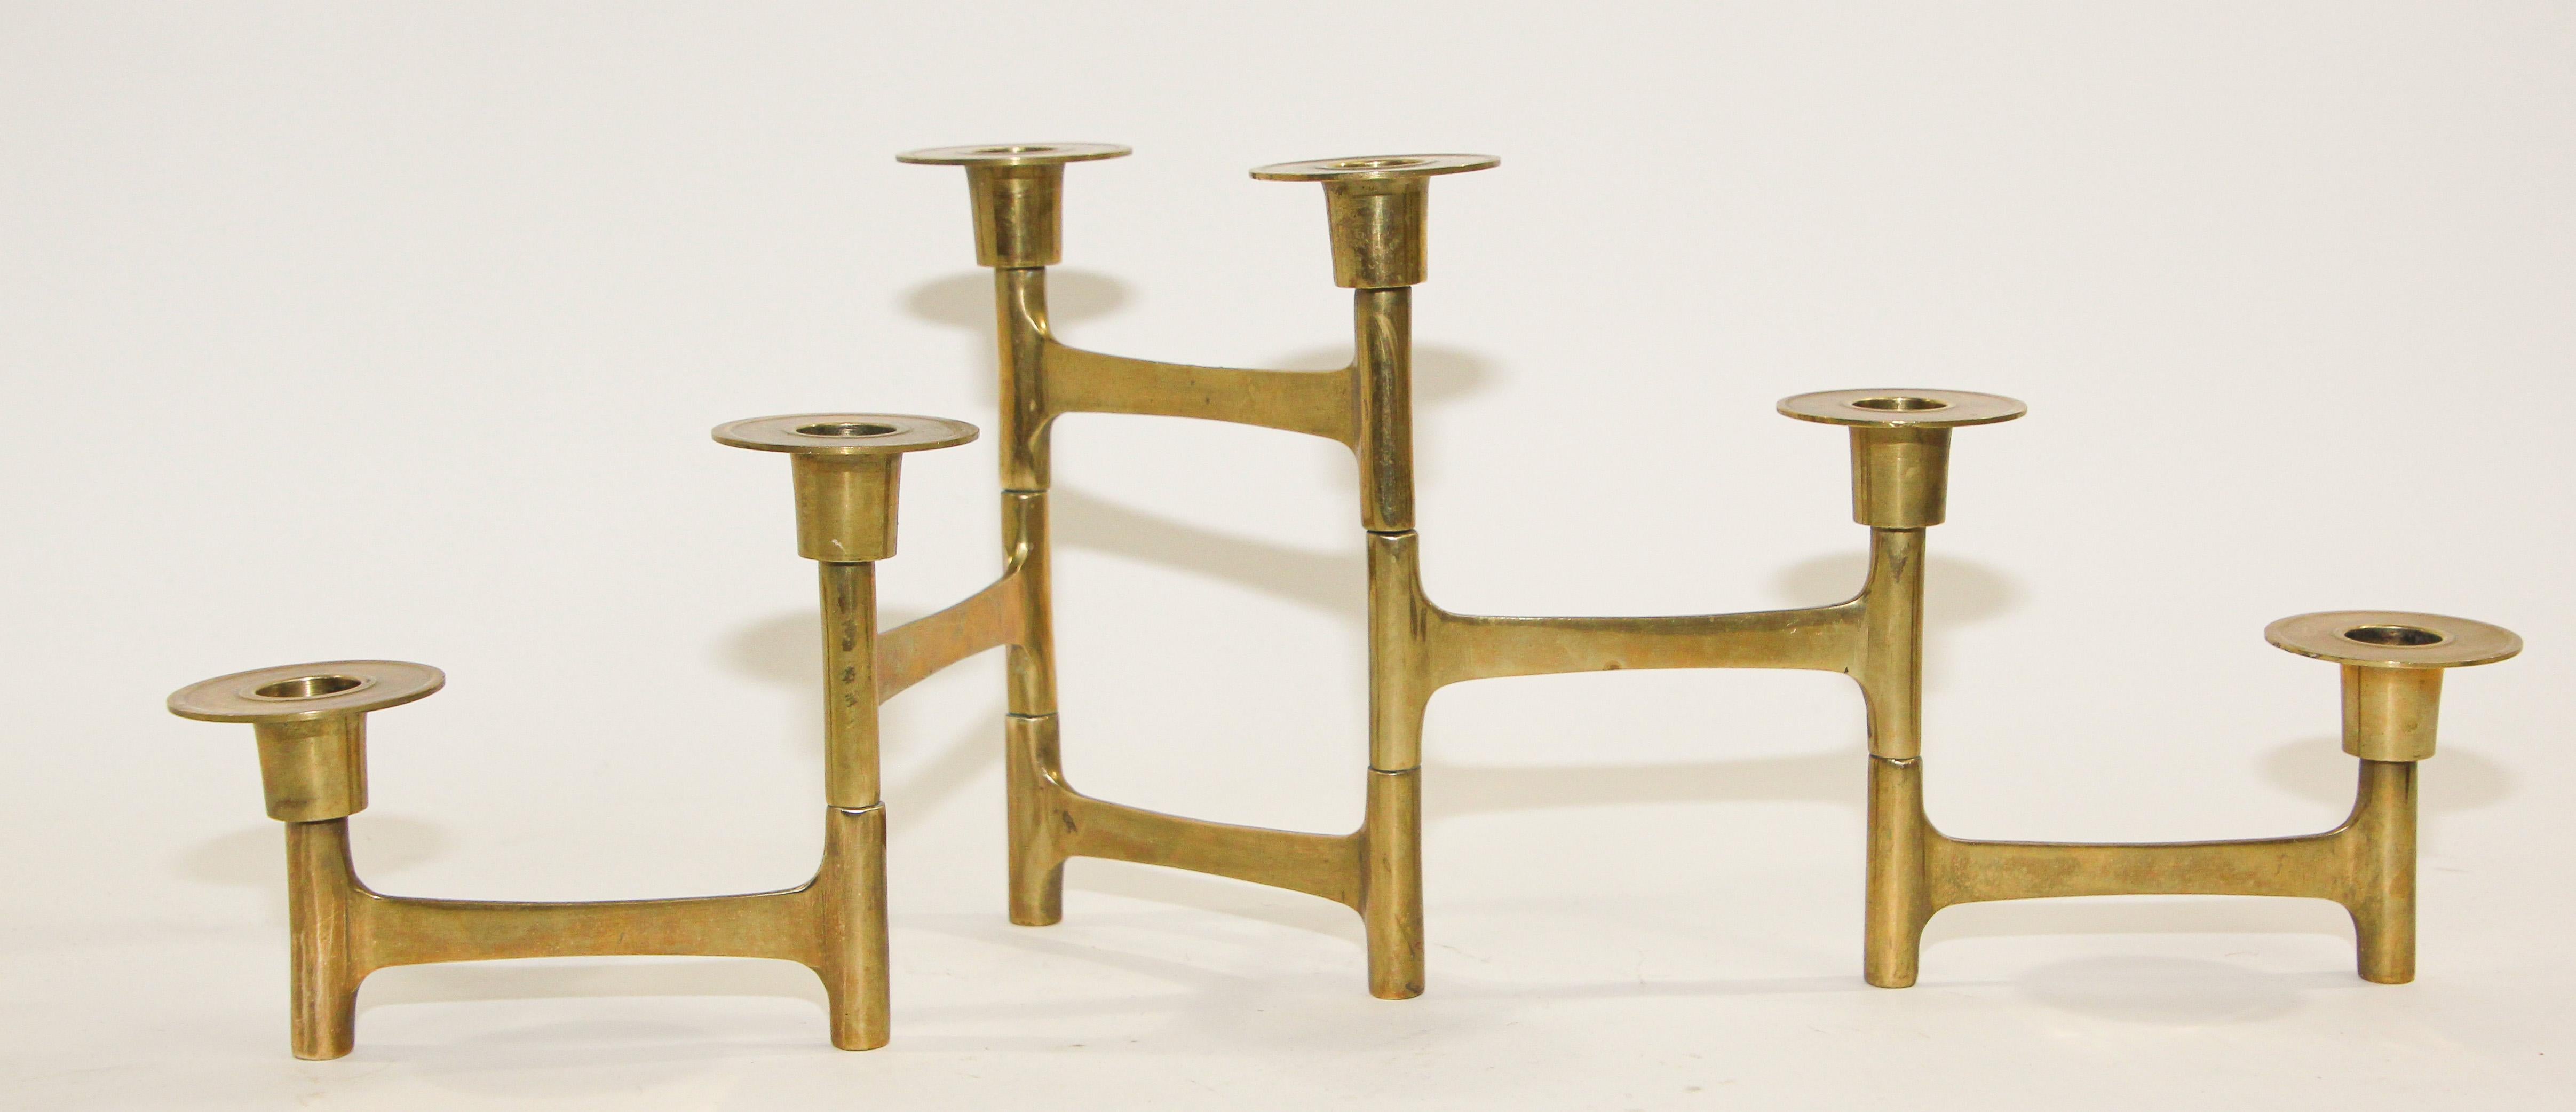 Midcentury Danish modern brass articulating candle holders.
Five articulated arms, each arm measures 4.5 inches in length, entire candleholder measures 22.5 inches when fully extended.
The taller holders measure 7 inches high while the smaller